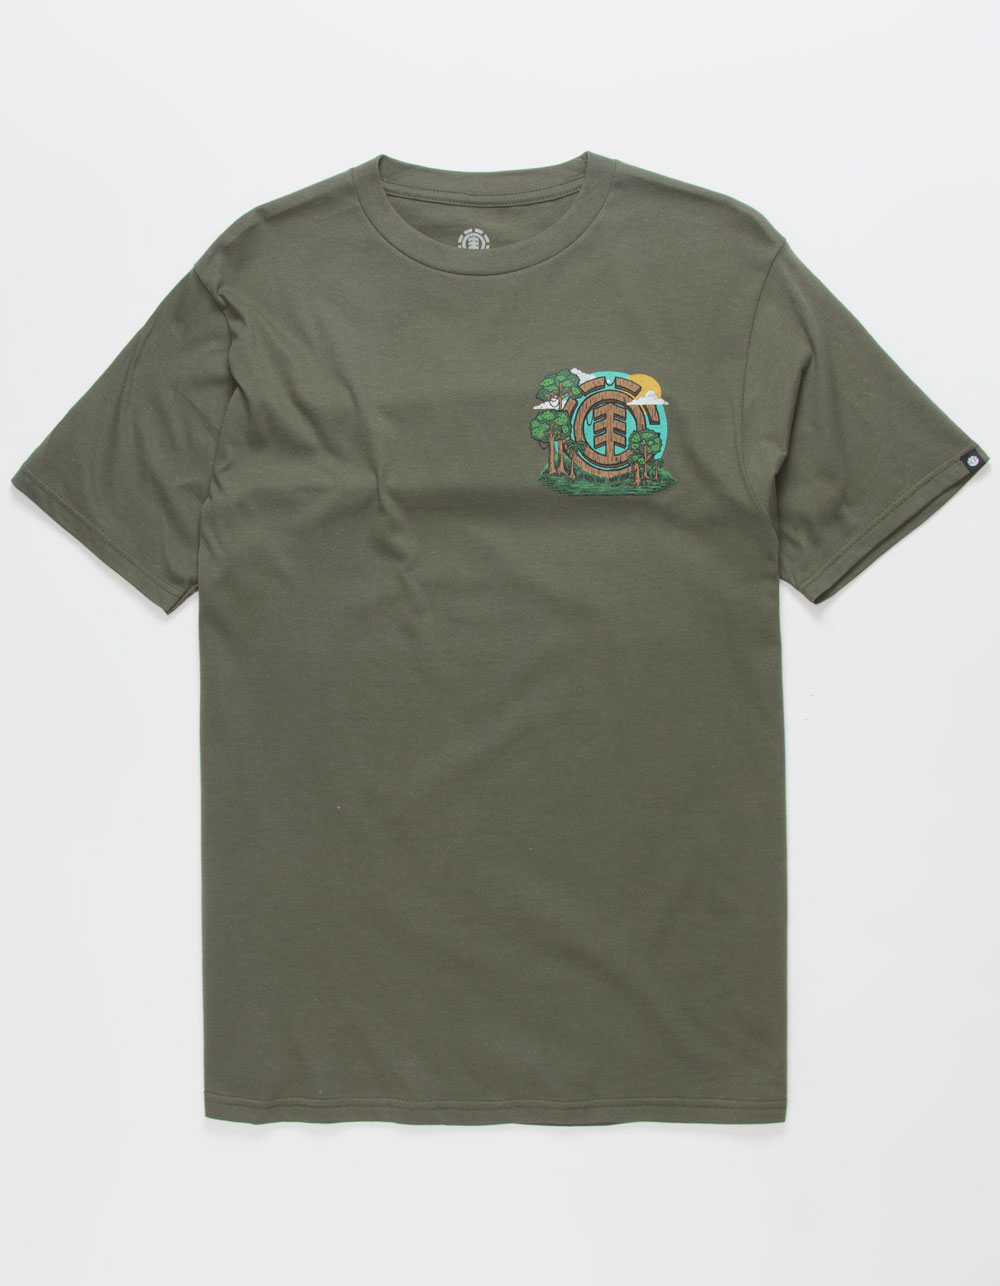 ELEMENT Jungle Mens Tee - ARMY | Tillys